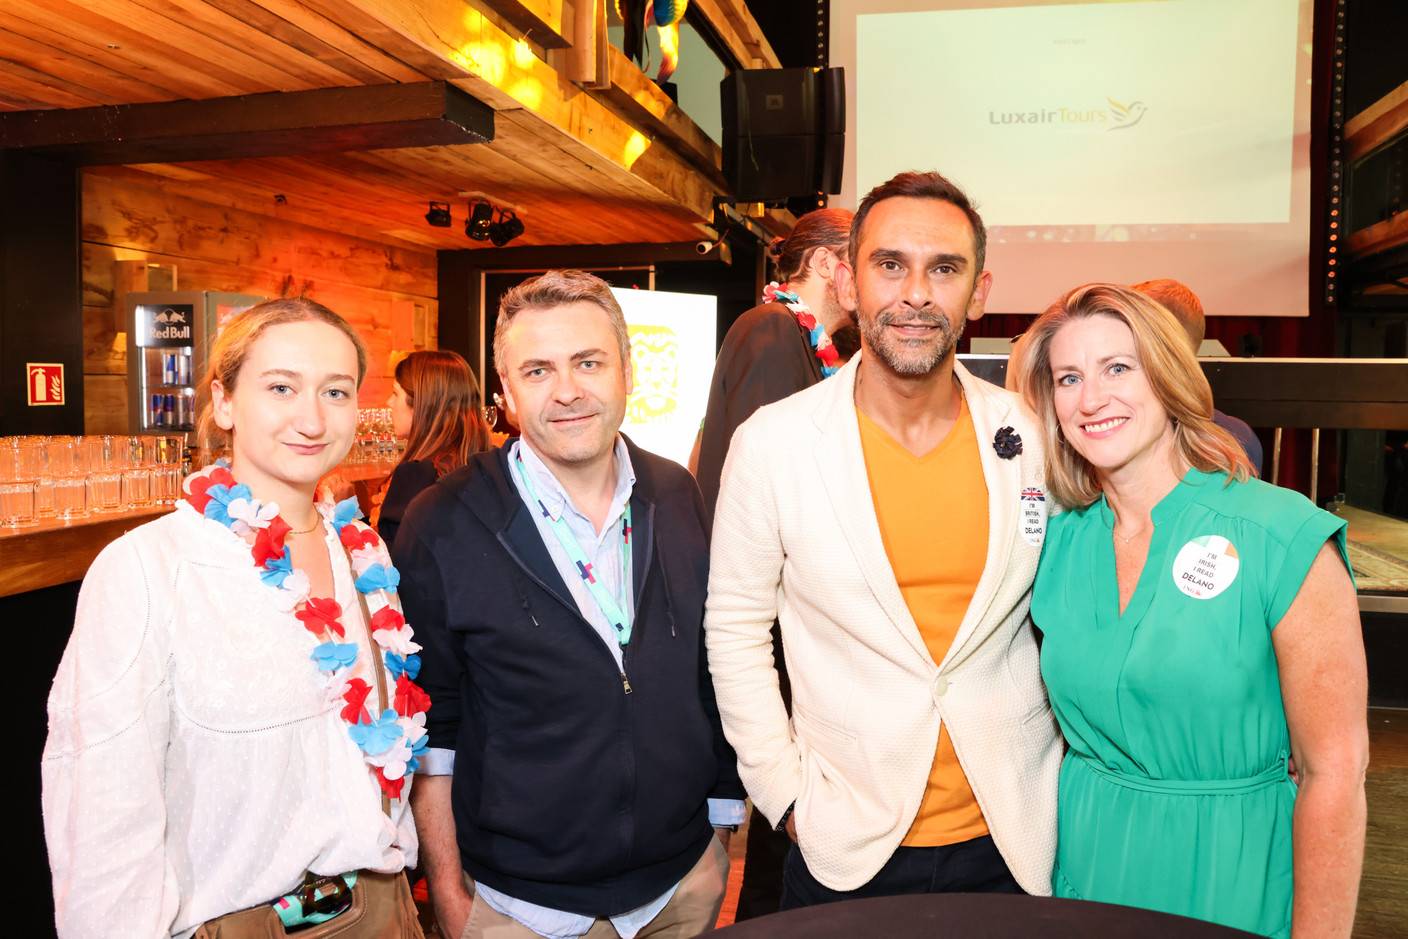 Christophe Regnault (Luxembourg House of Financial Technology), second from left, Nasir Zubairi (Lhoft), second from right, and Jennifer Crisman (YogaBalance), on right. Photo: Marie Russillo/Maison Moderne